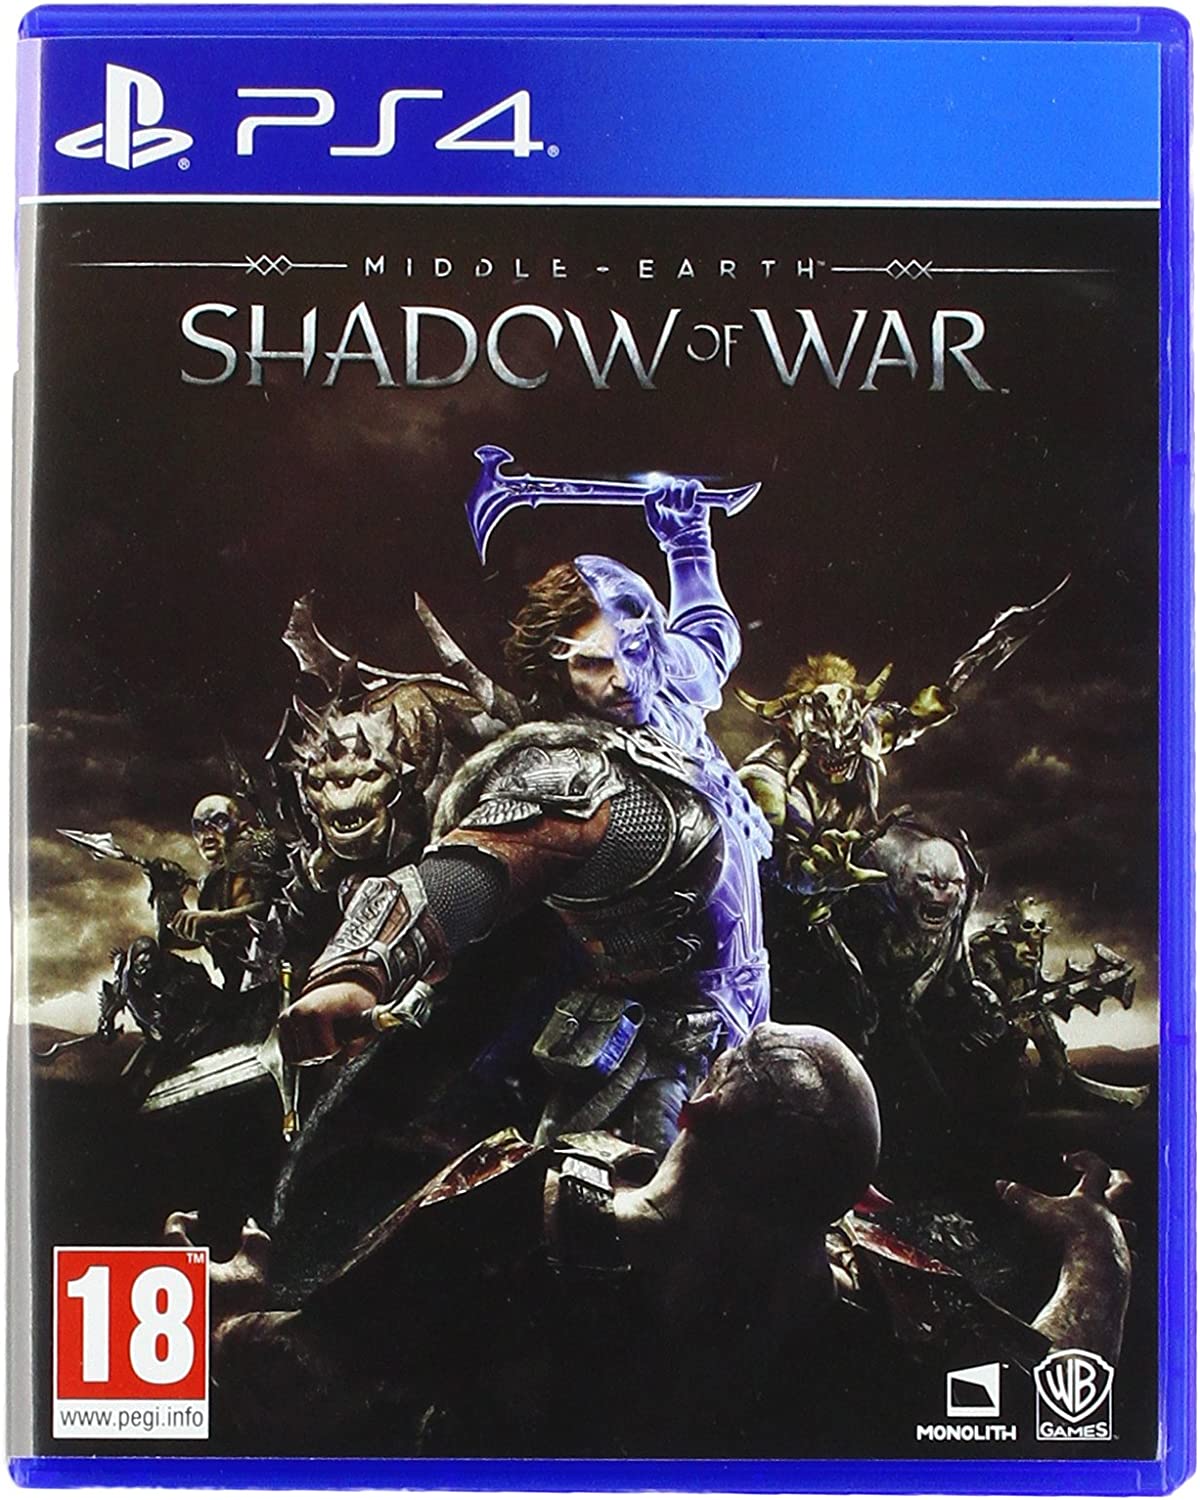 Sony Playstation 4 PS4 Game Middle Earth Shadow of War PS4, playstation